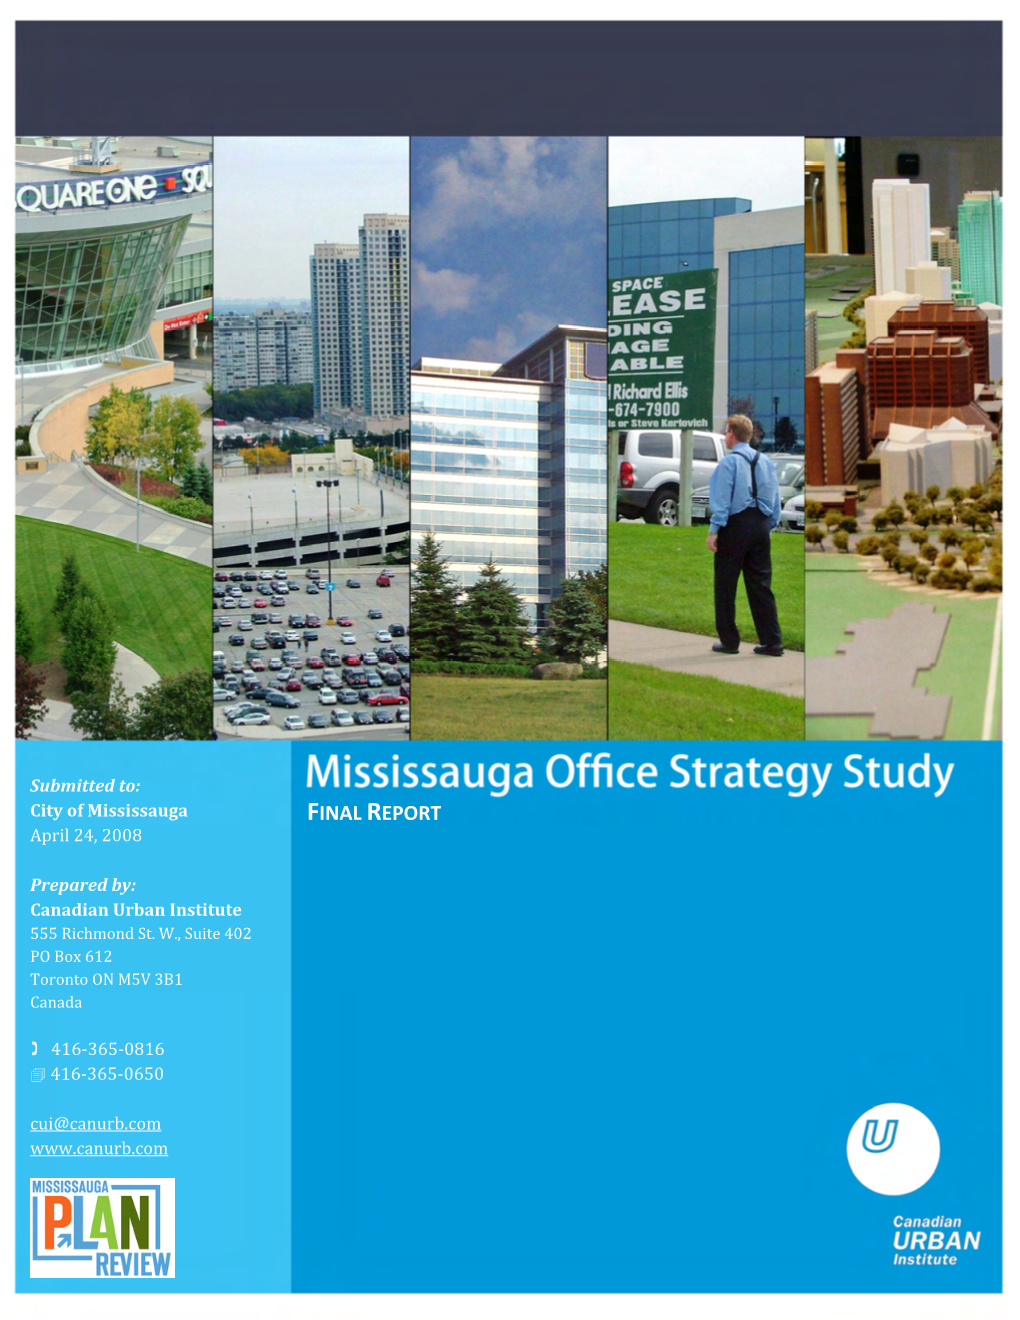 Mississauga Office Strategy Study Has Been Prepared for the City of Mississauga